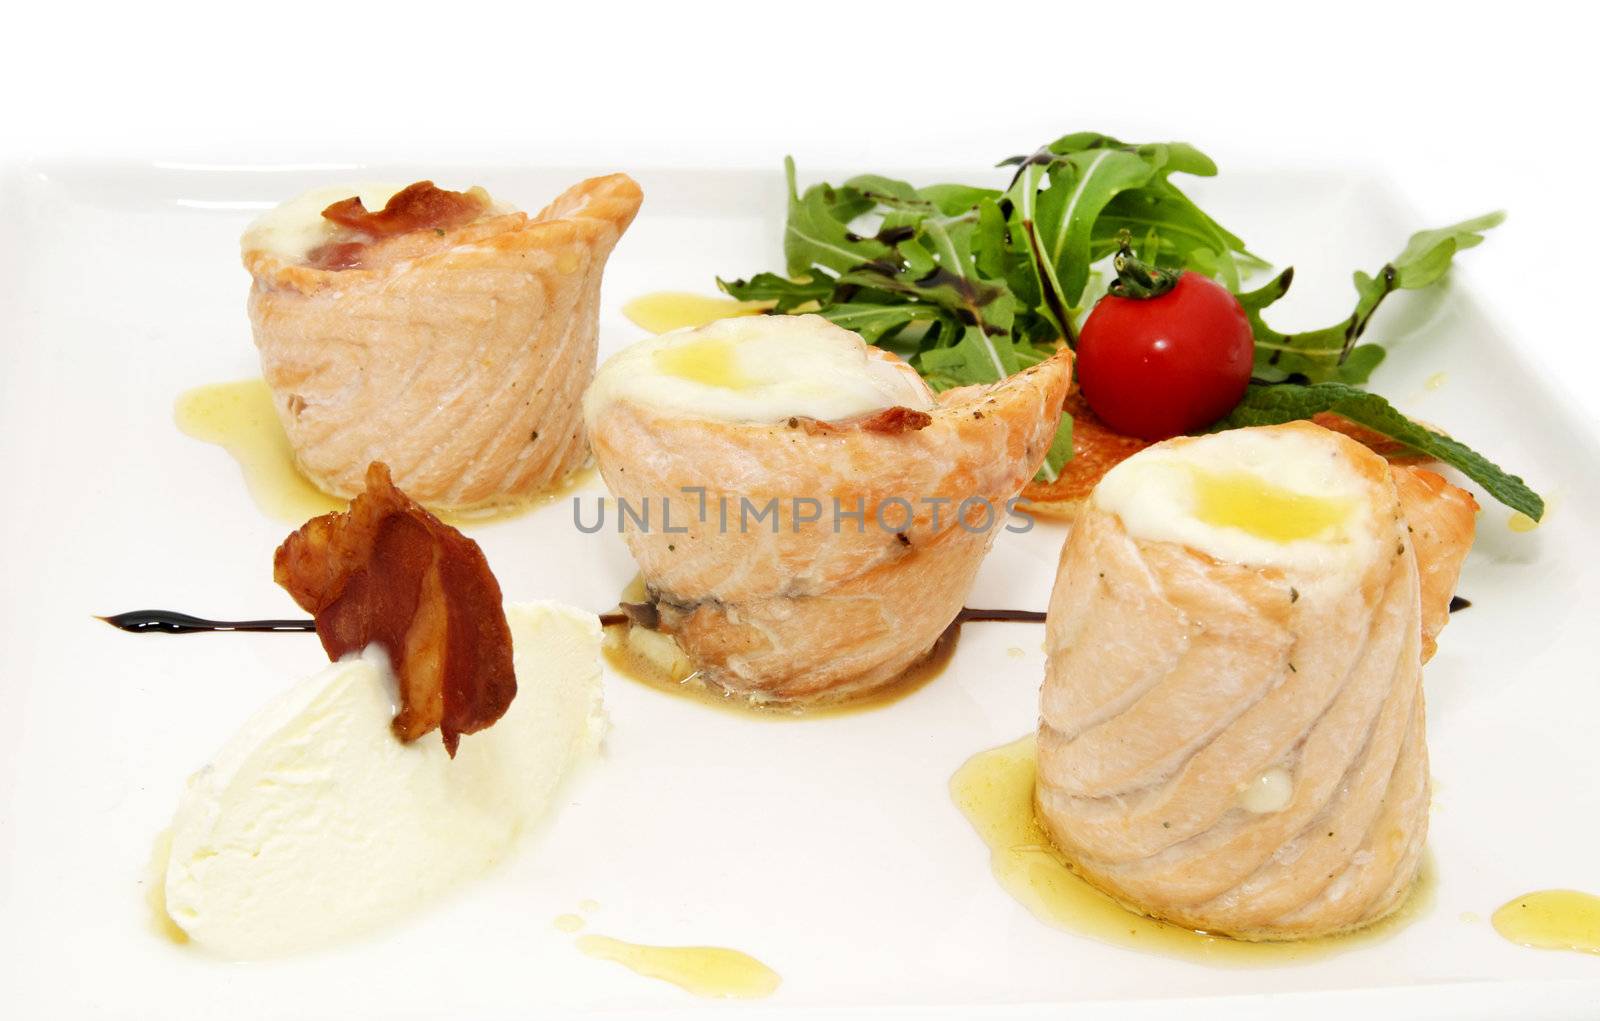 grilled fillet of fish with greens and tomato on a white background